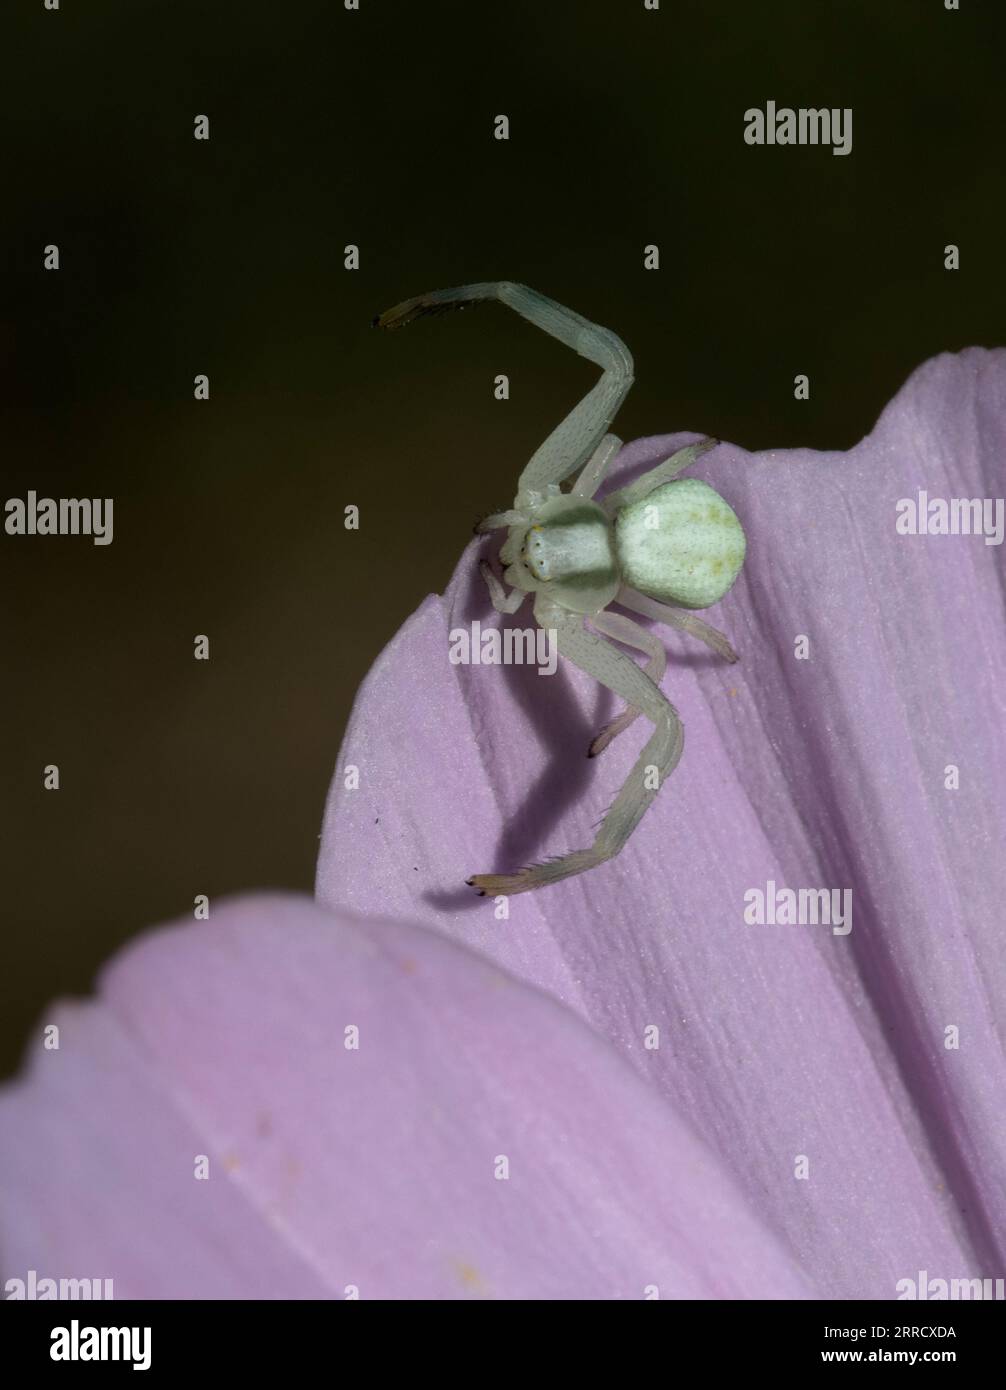 Green Crab Spider on Pink Cosmos Daisy Stock Photo